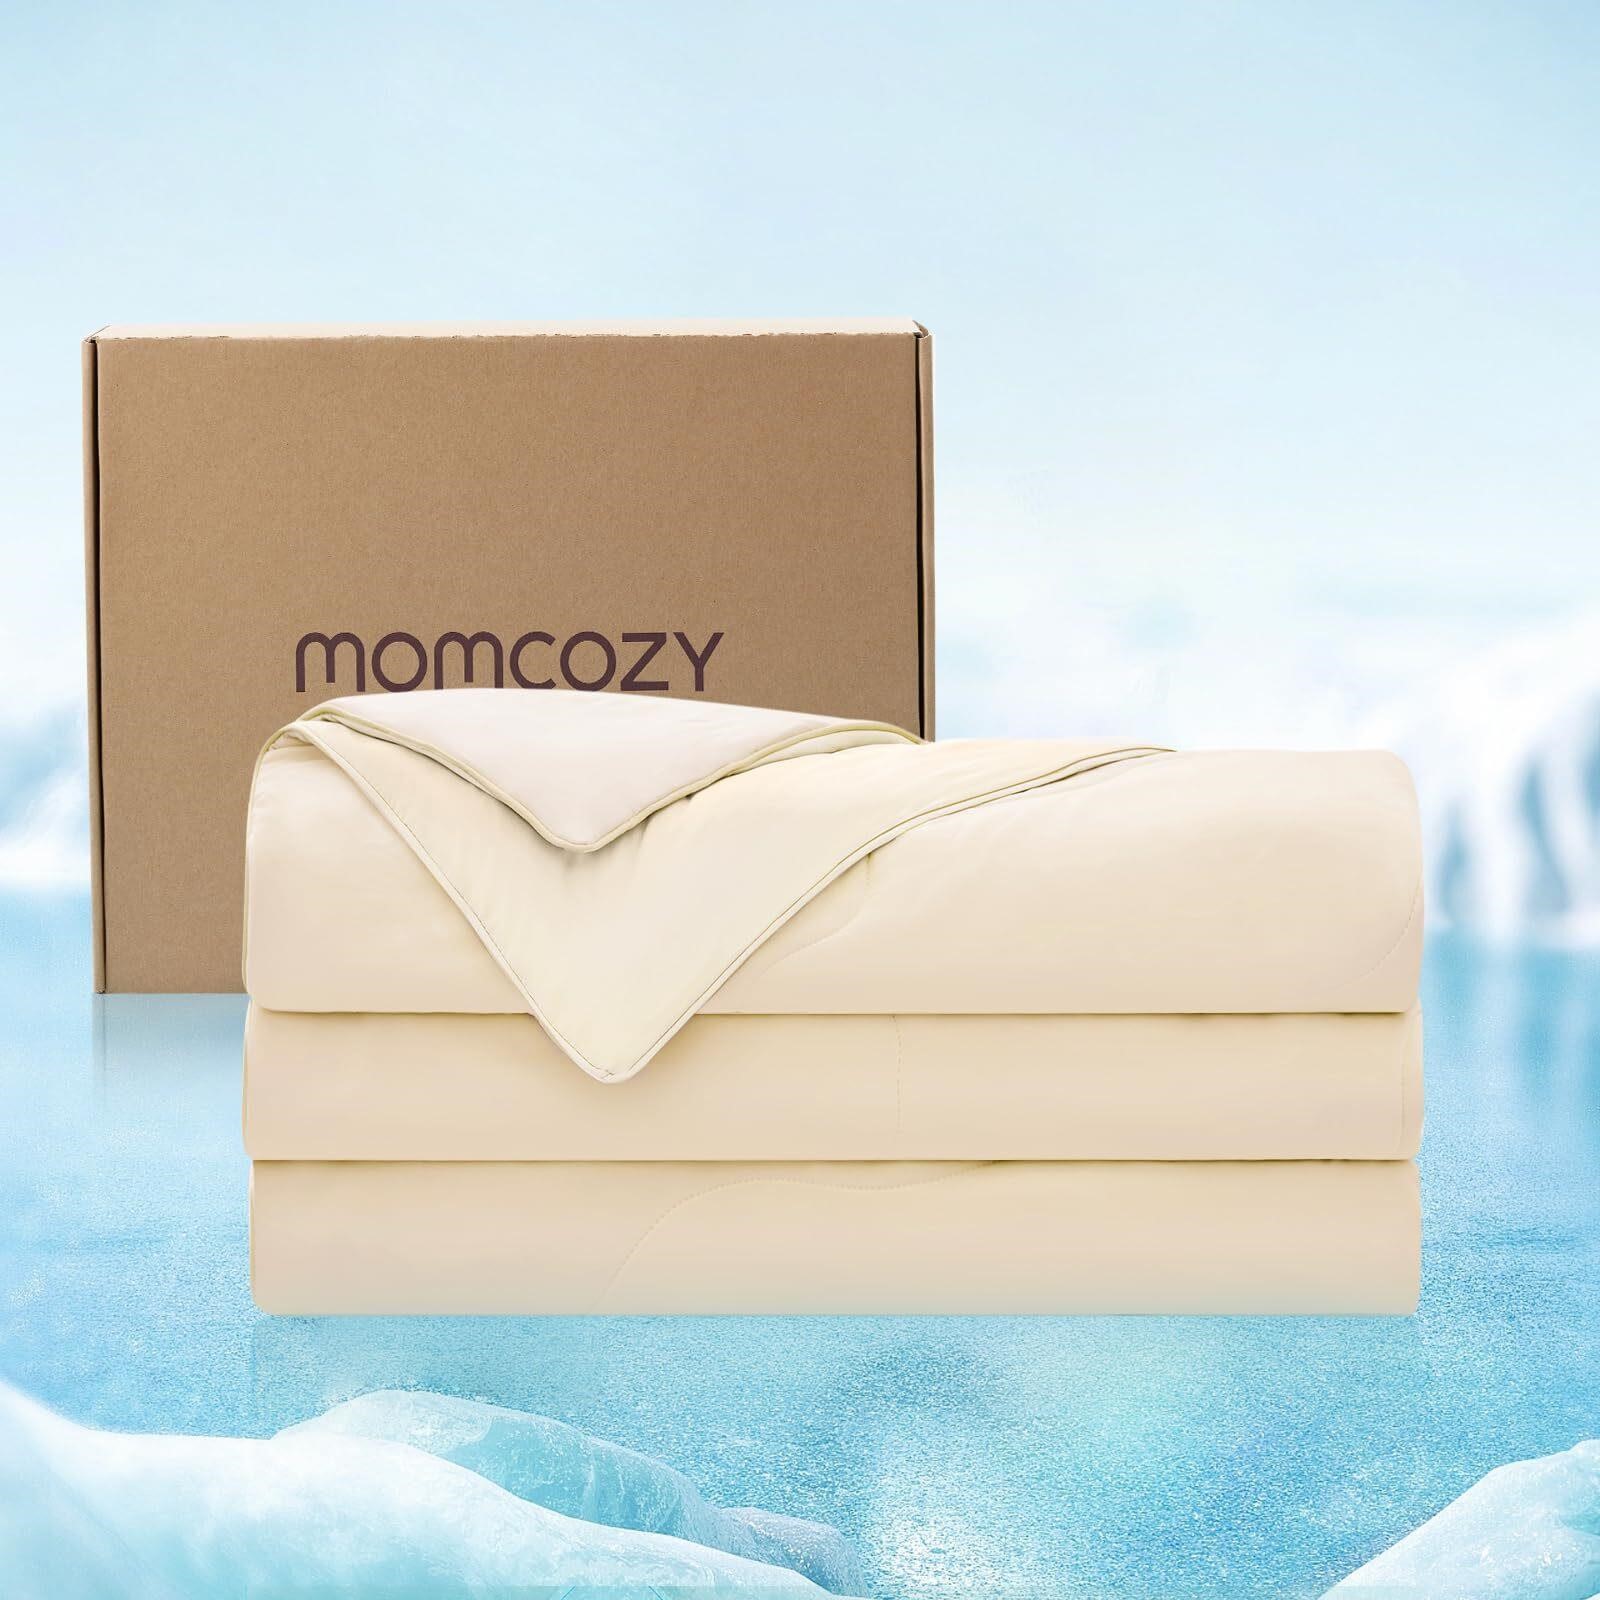 Momcozy Life CoolMurm Cooling Comforter for Hot